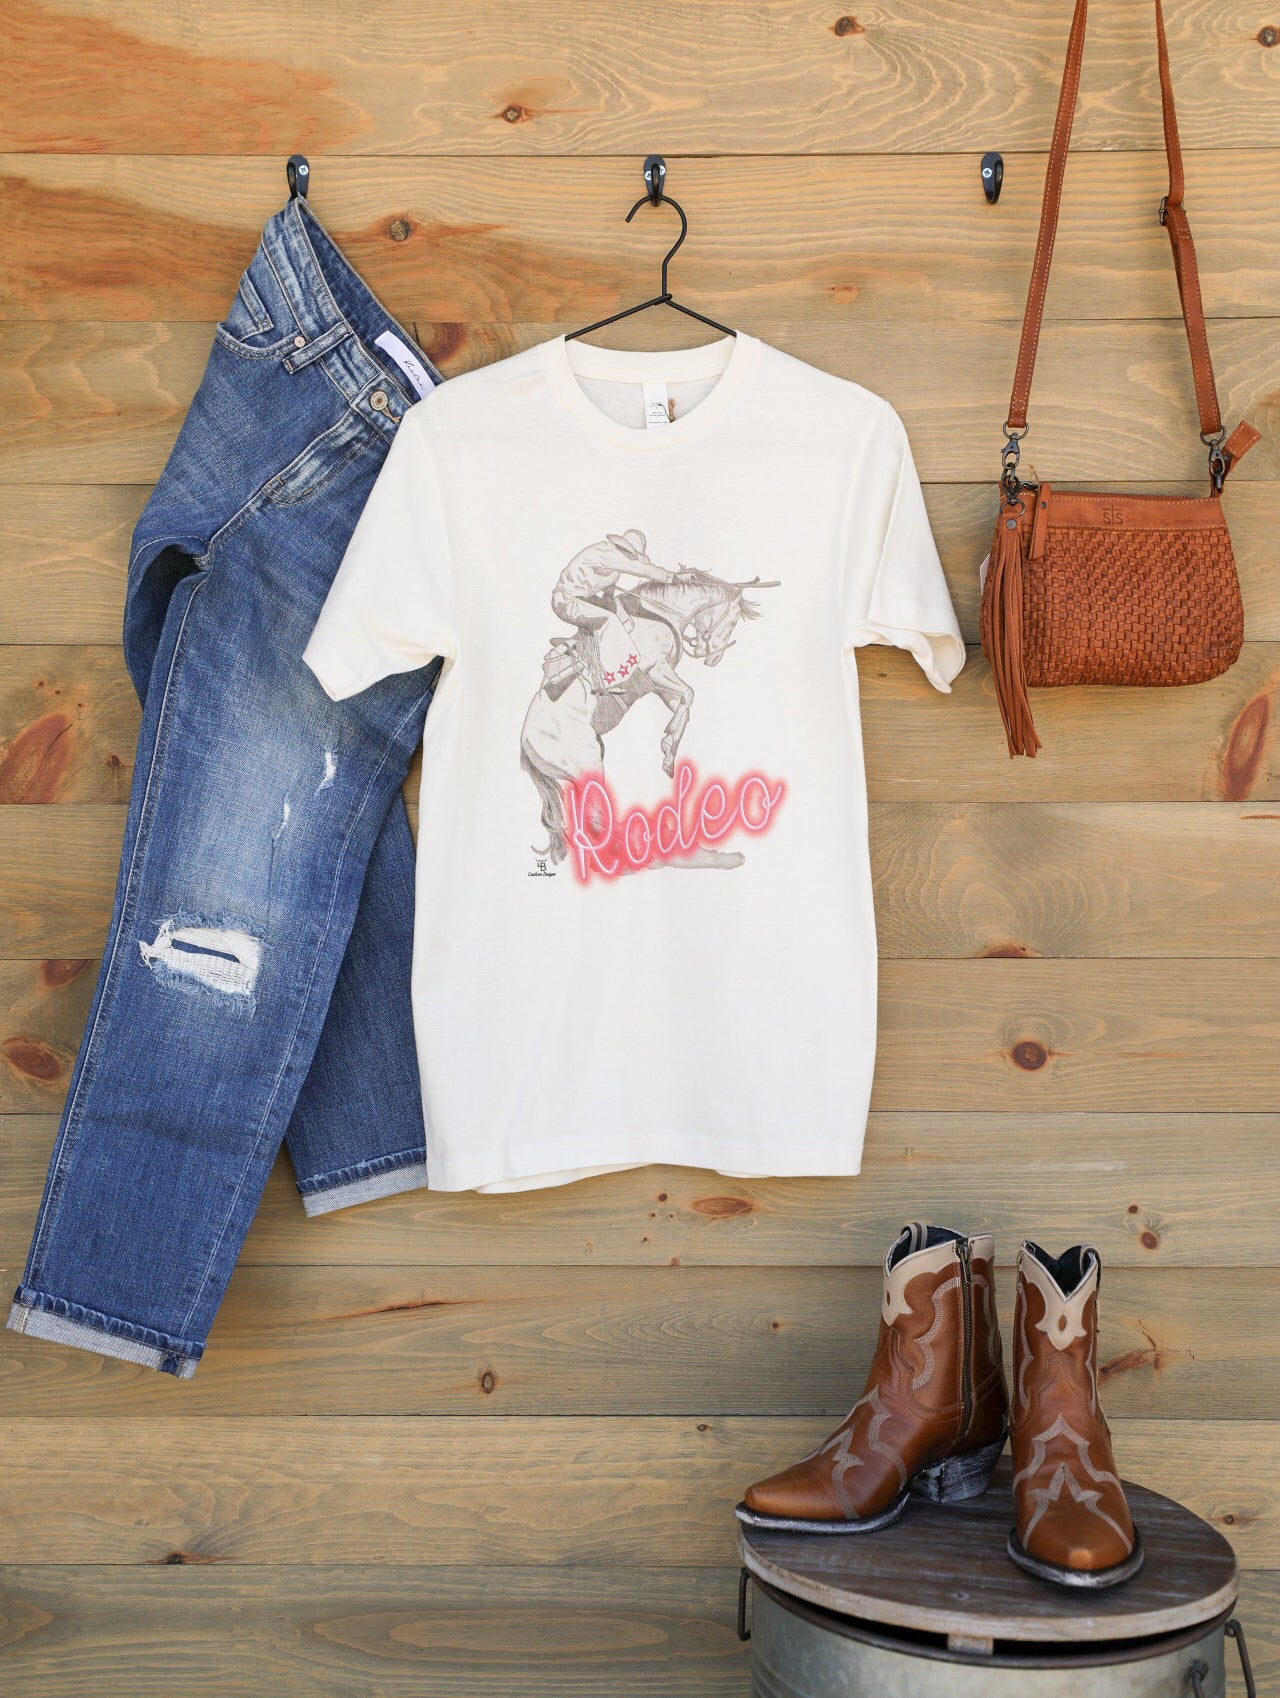 Neon Rodeo Tee-Graphic Tee-Crooked Horn Company, Online Women's Fashion Boutique in San Tan Valley, Arizona 85140